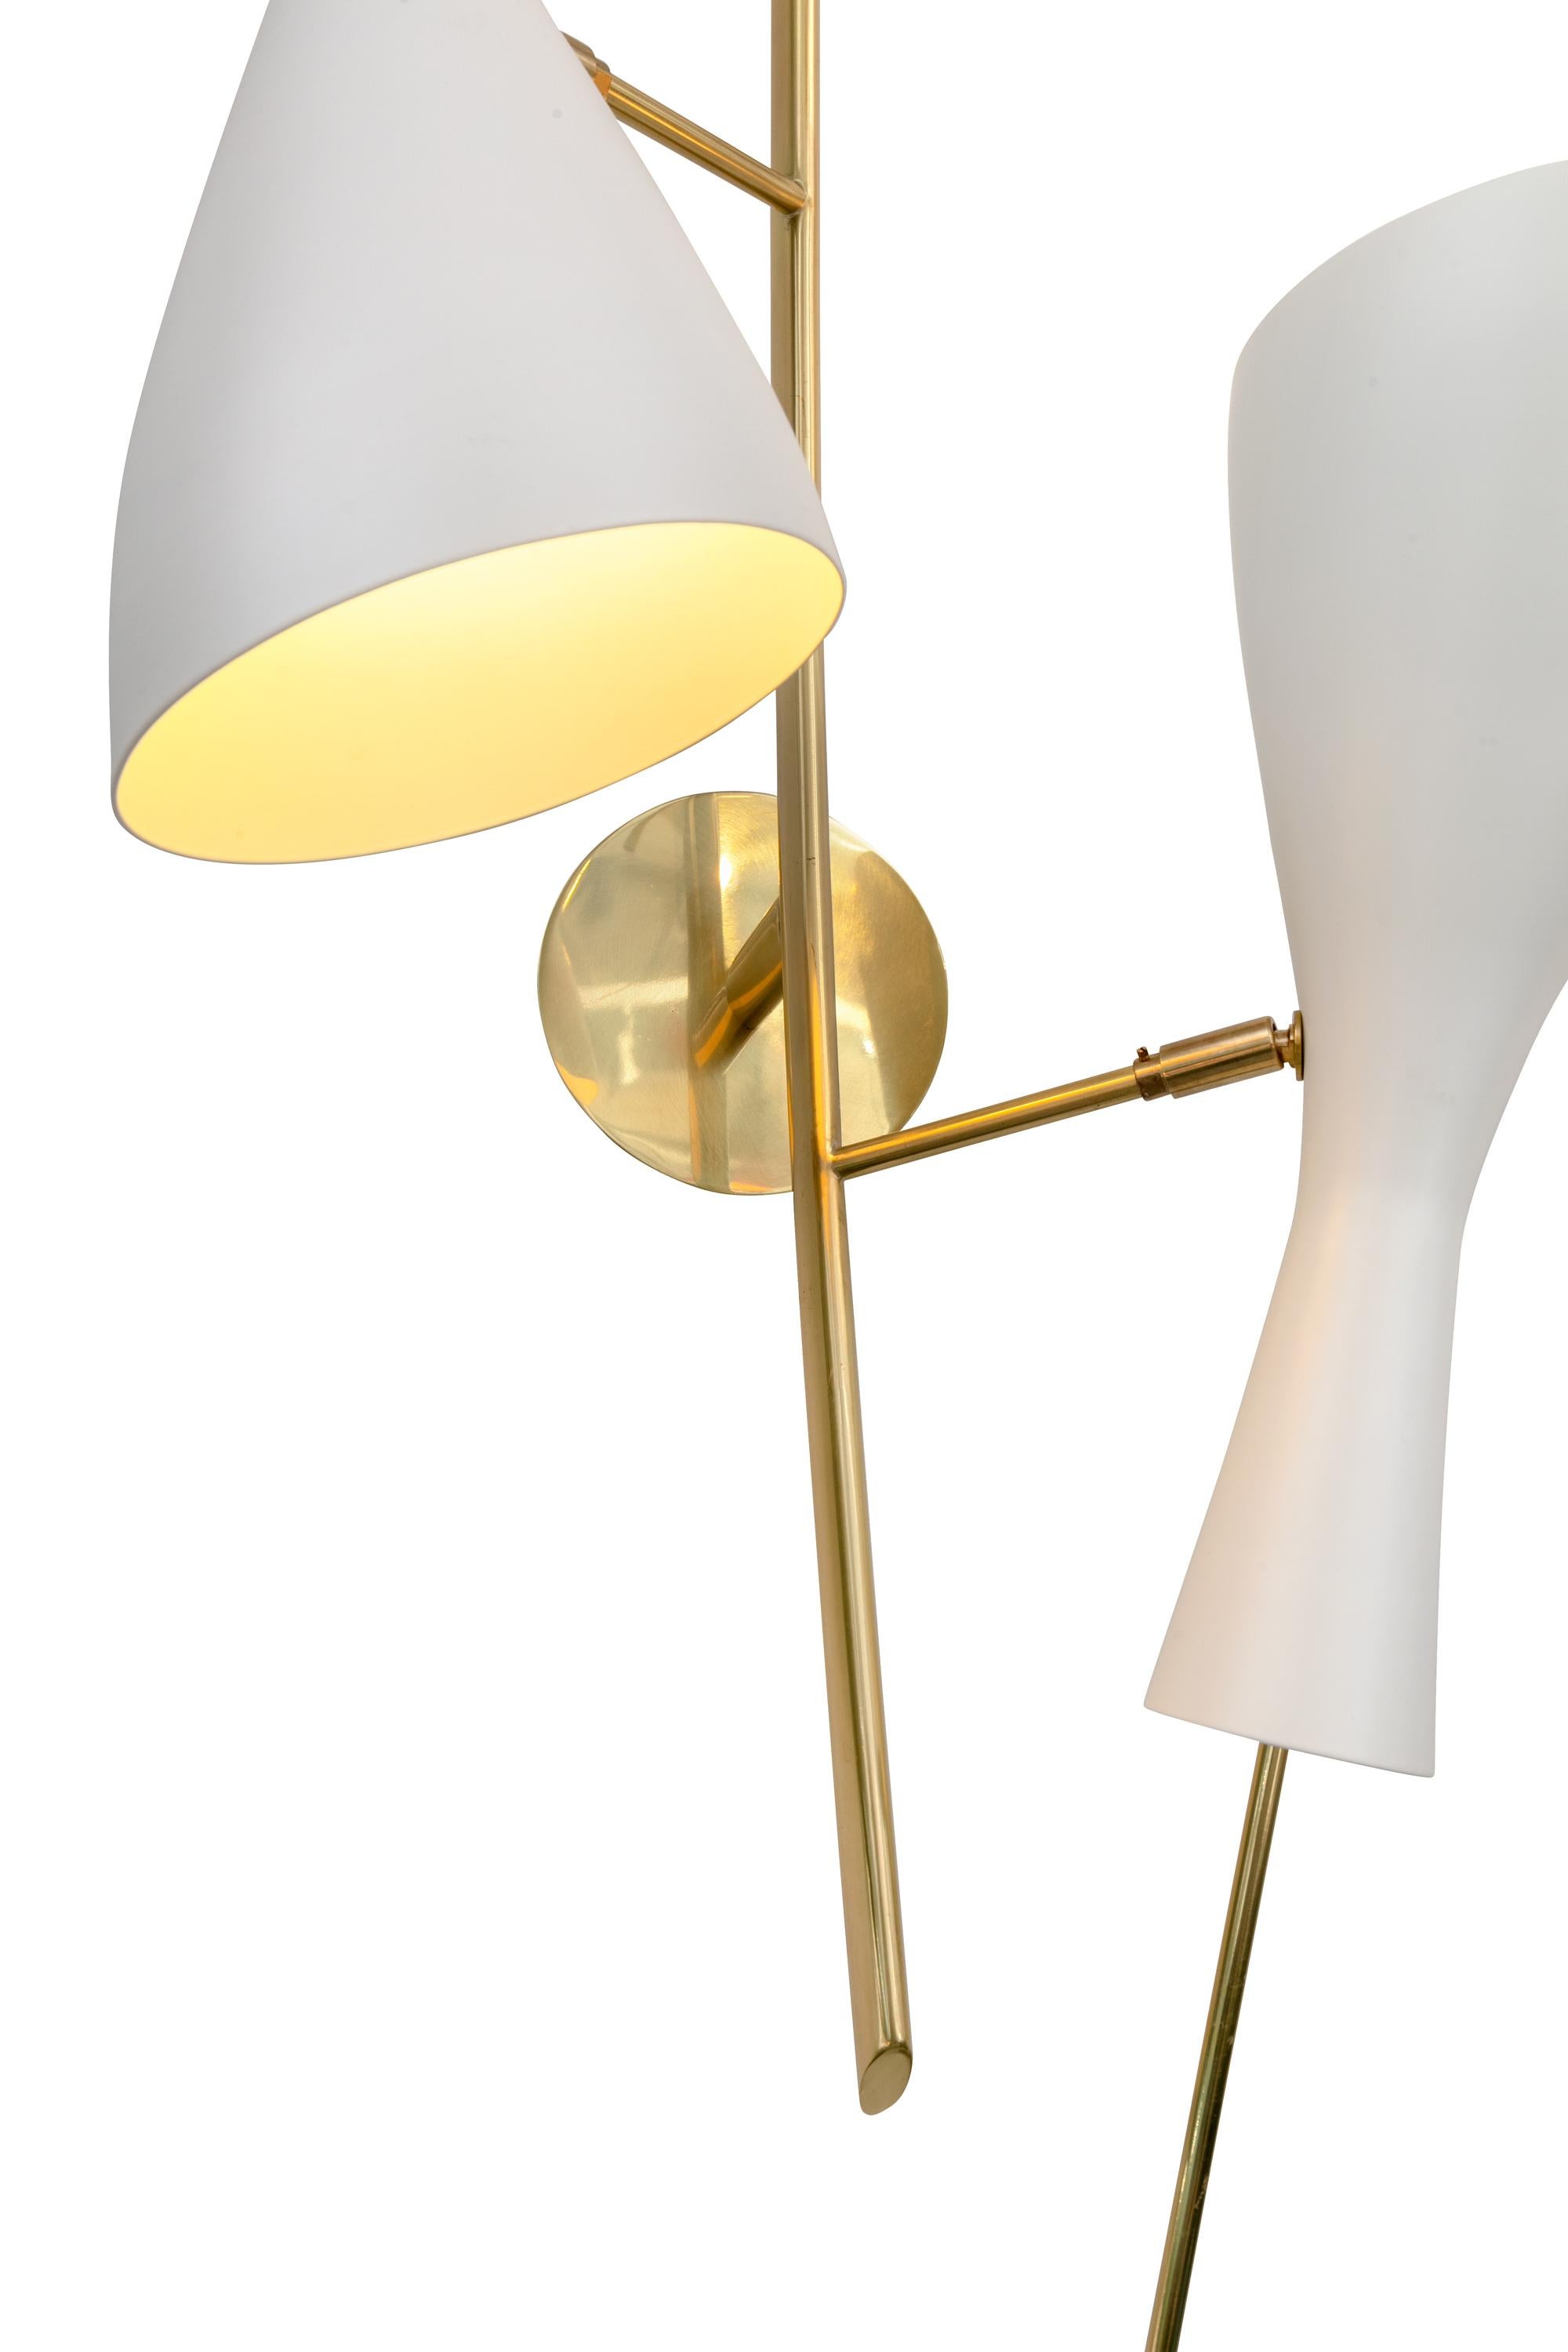 Aluminum Three Brass and White Metal Shade Midcentury Style Sconces, Italy, 2018